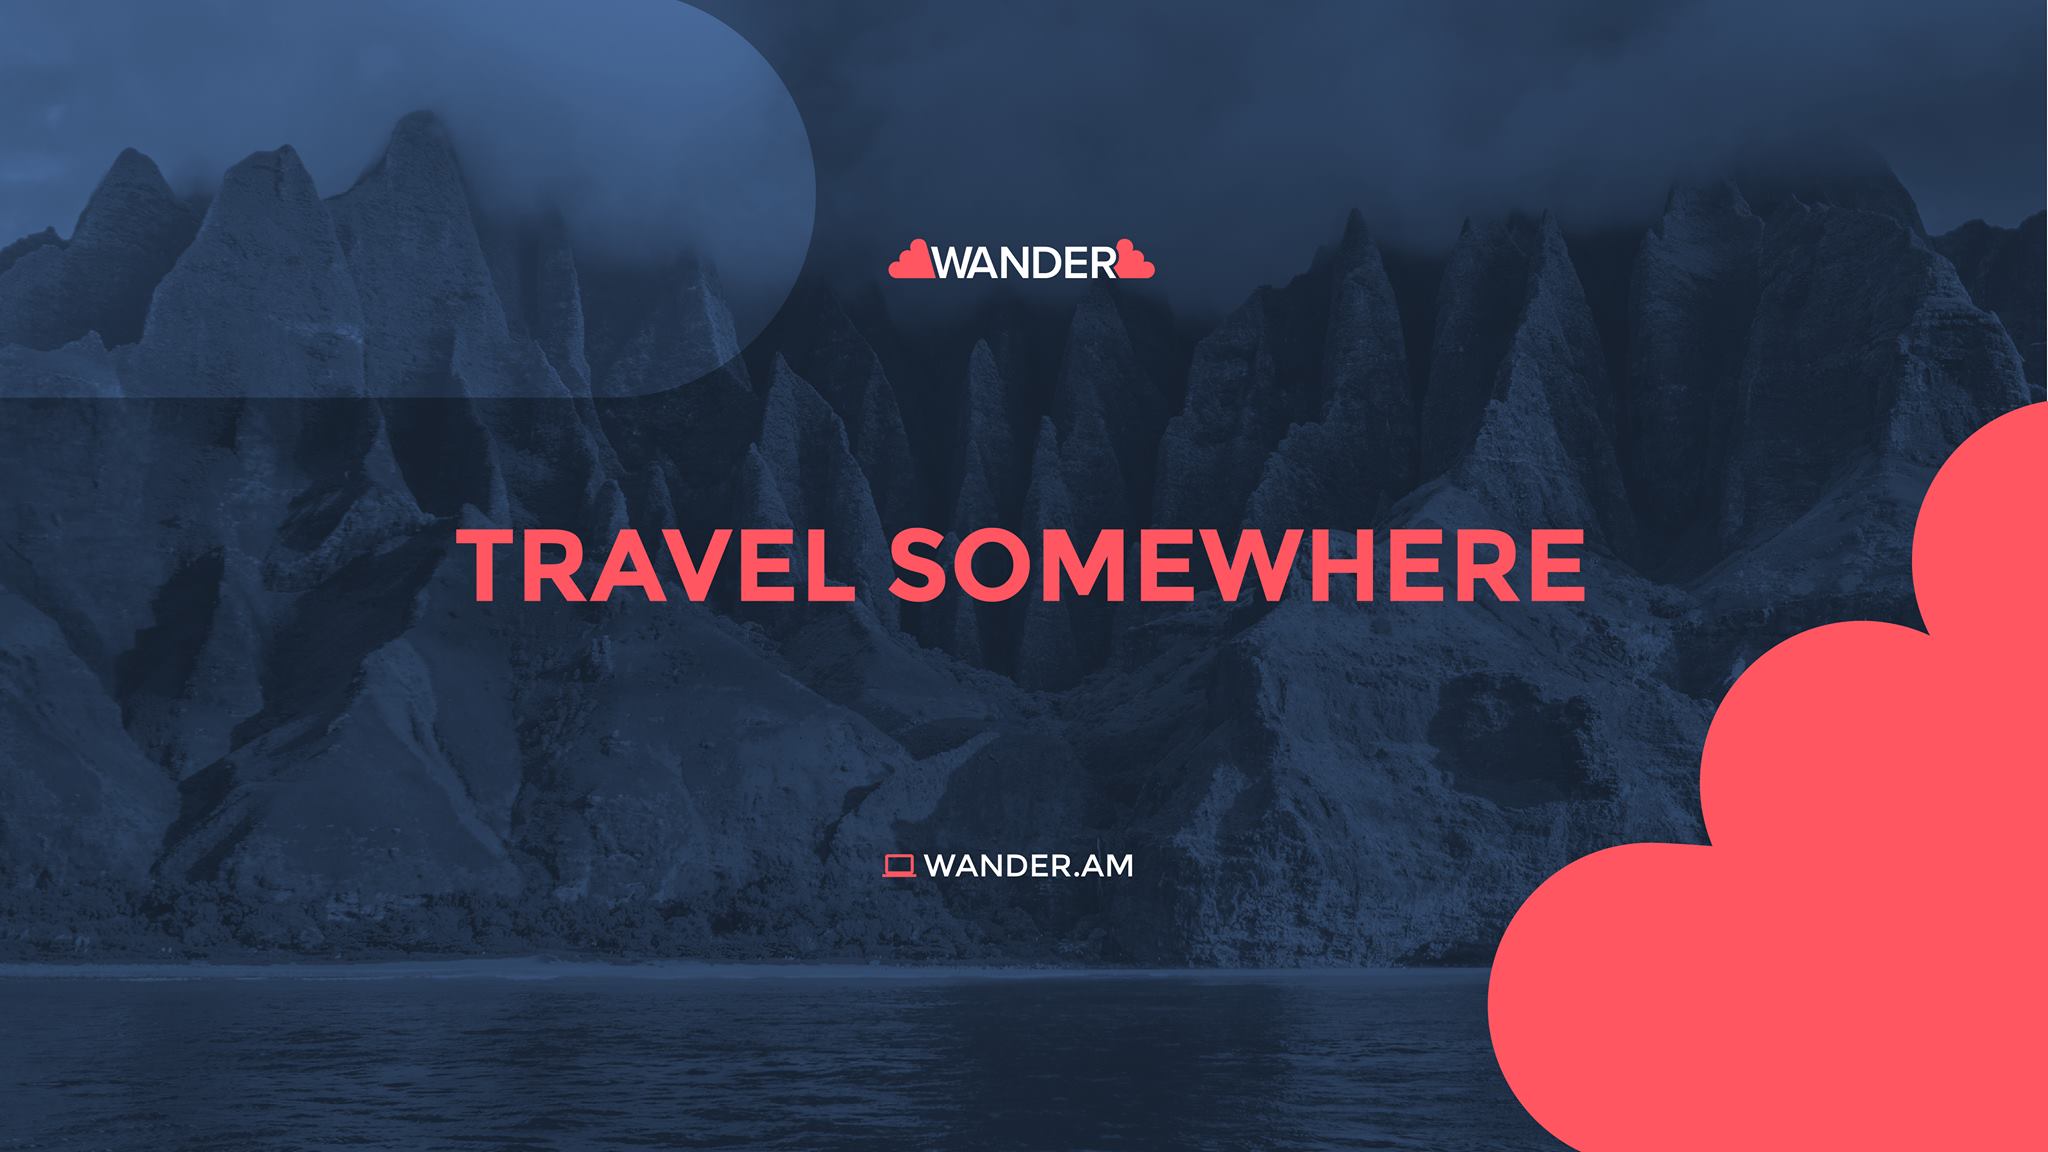 WANDER- PLAN YOUR JOURNEY YOUR OWN WAY!